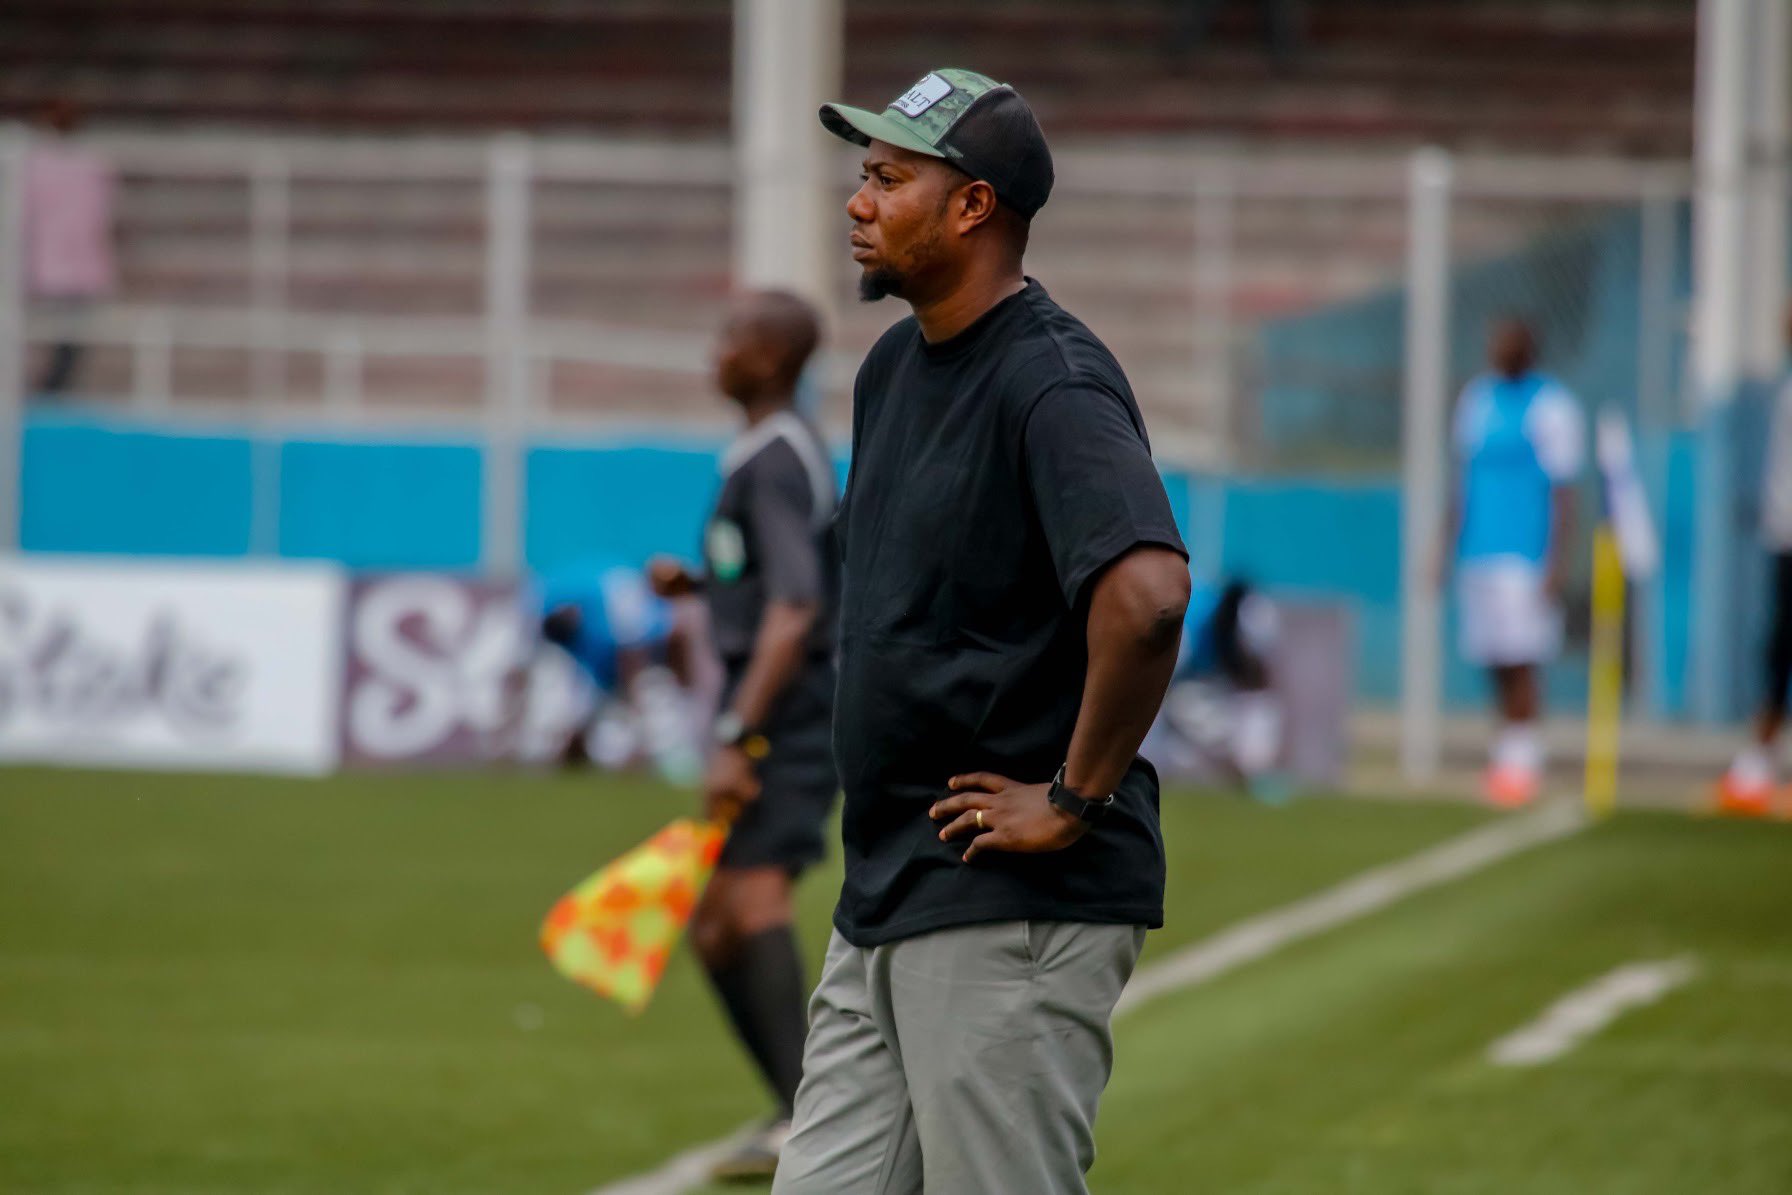 “Honestly speaking, we are struggling mentally” Coach Yemi cries out